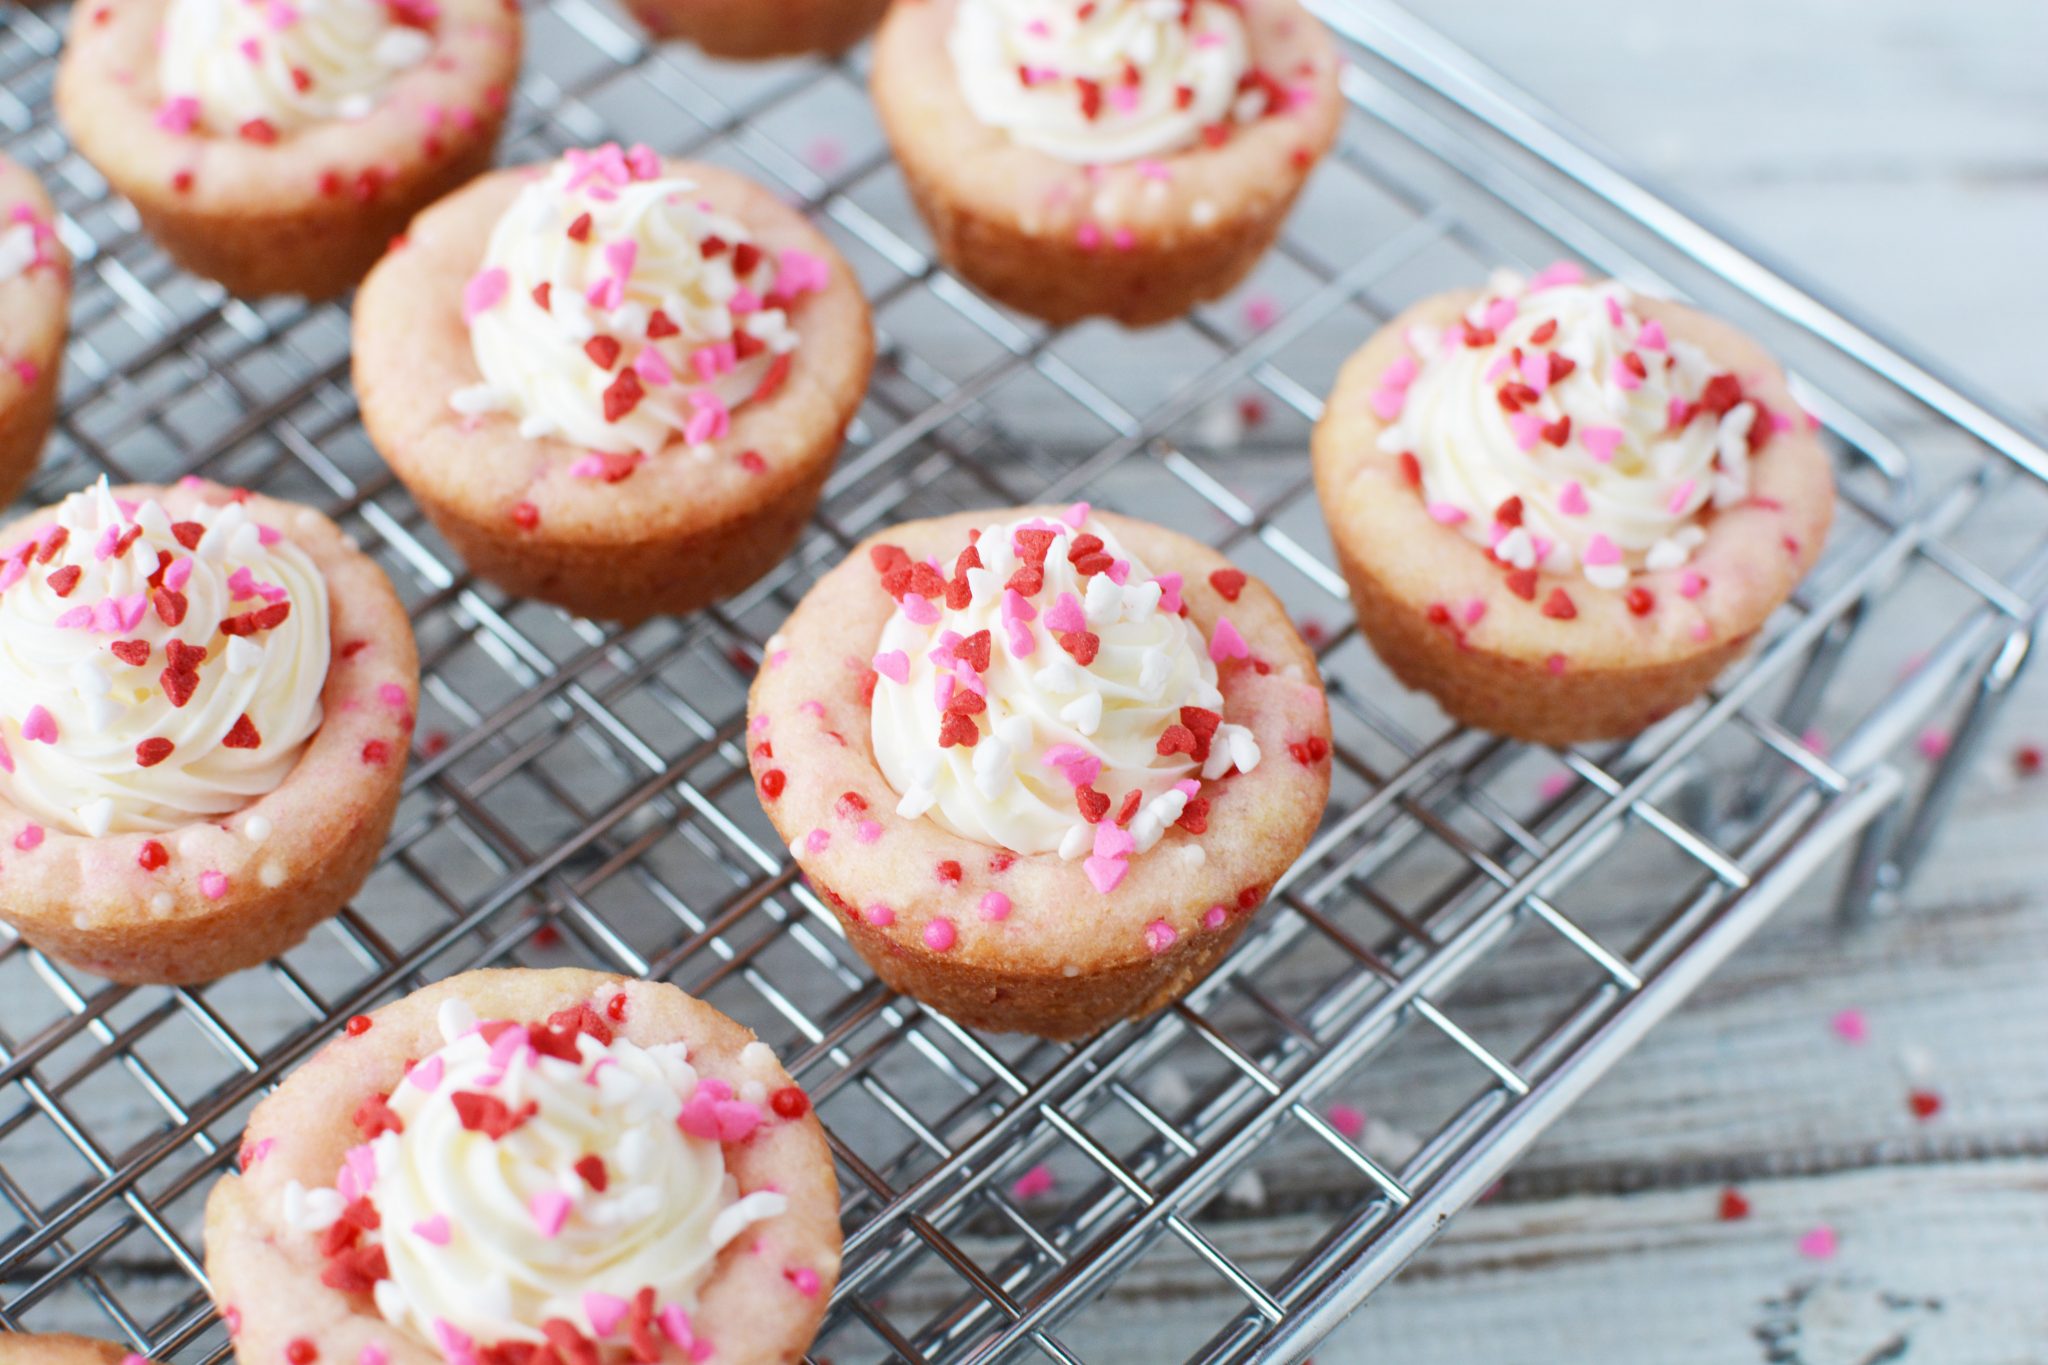 Sugar Cookie Cups filled with frosting and covered with red and pink sprinkles sitting on stainless steel cooling racks